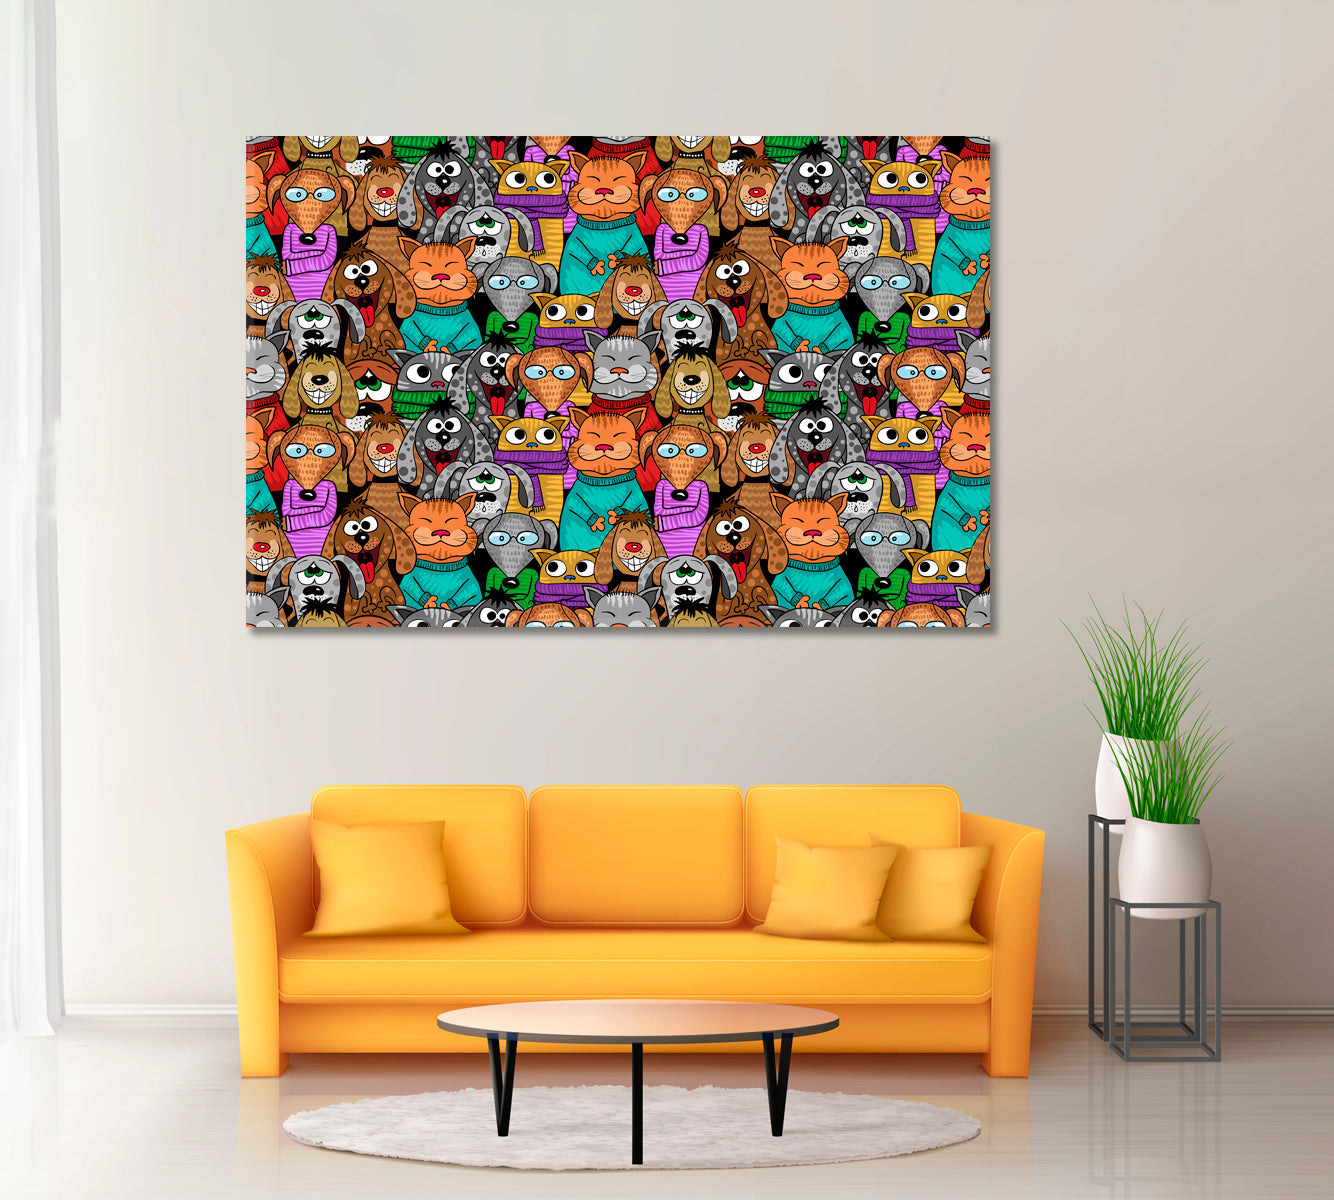 Cartoon Cats and Dogs Canvas Print ArtLexy 1 Panel 24"x16" inches 